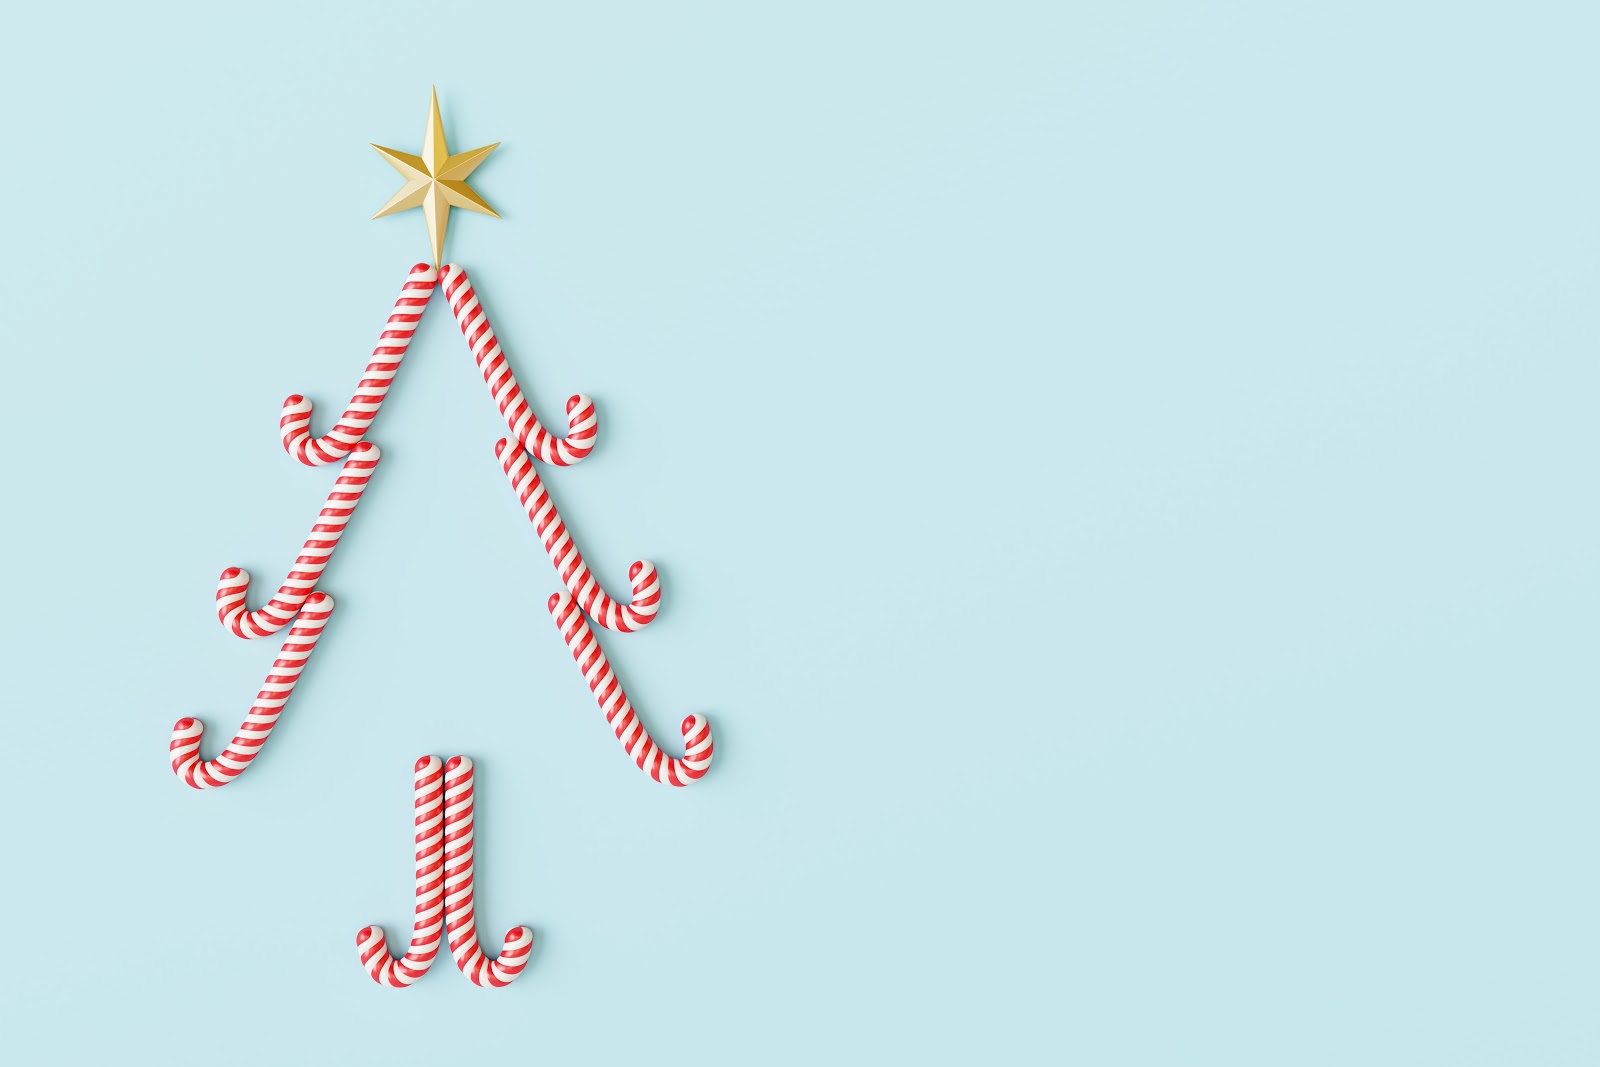 Christmas decorating ideas: A Christmas tree made out of candy canes